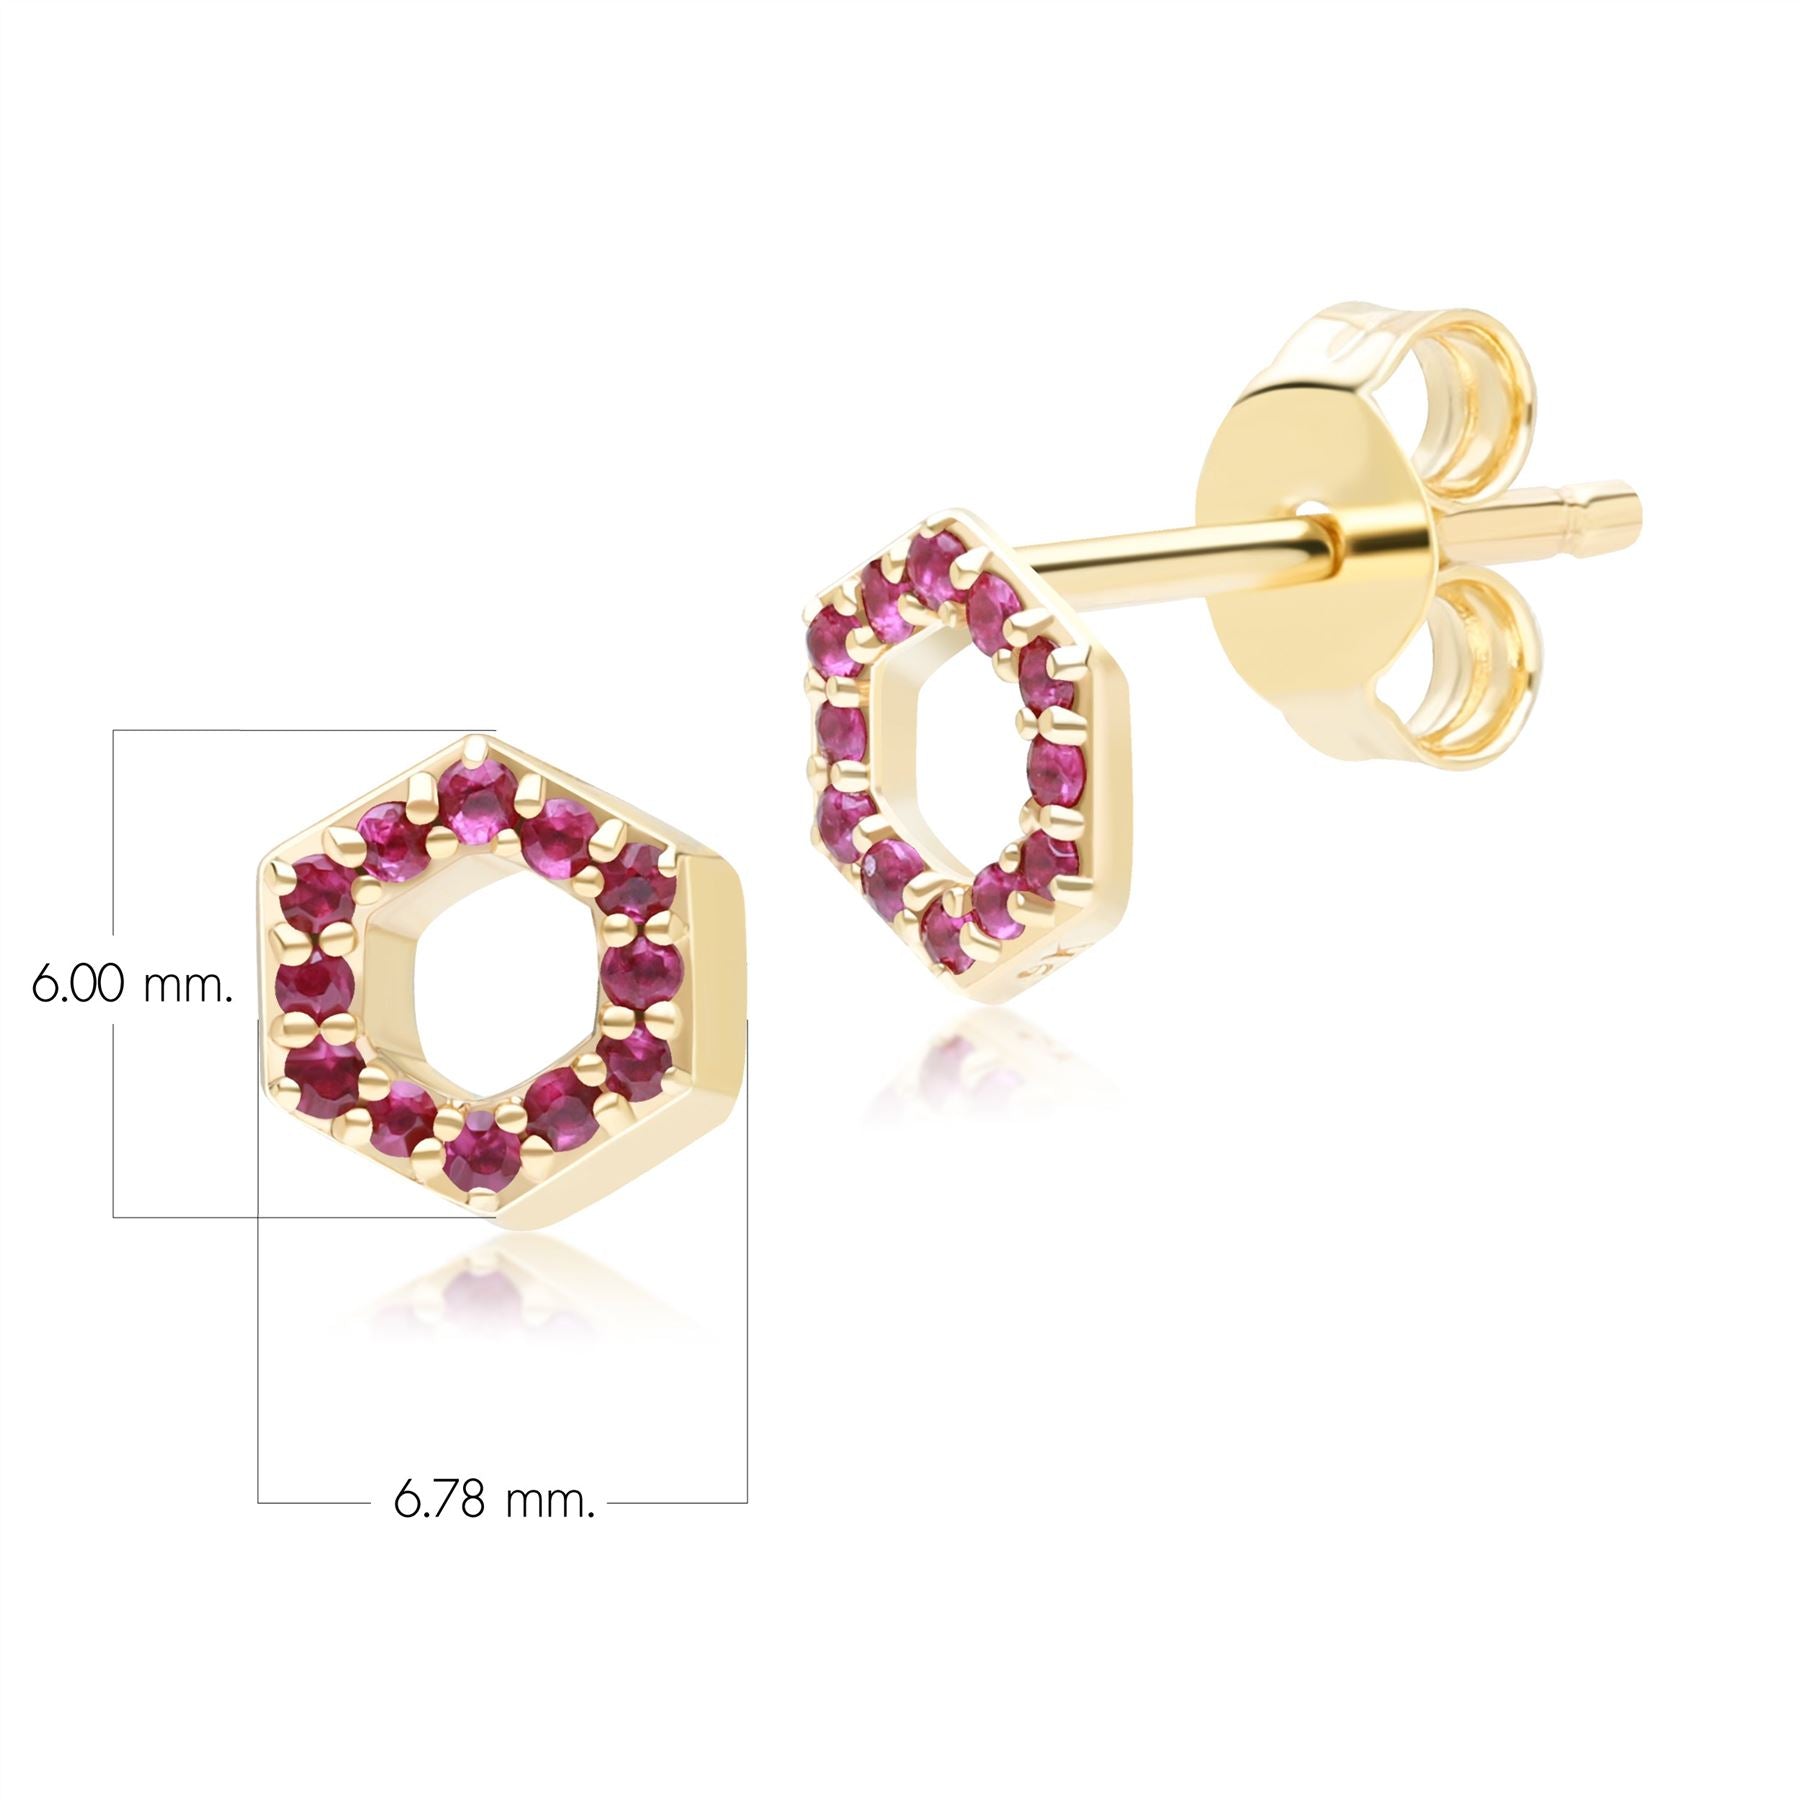 Geometric Hex Ruby Stud Earrings in 9ct Yellow Gold Dimensions 